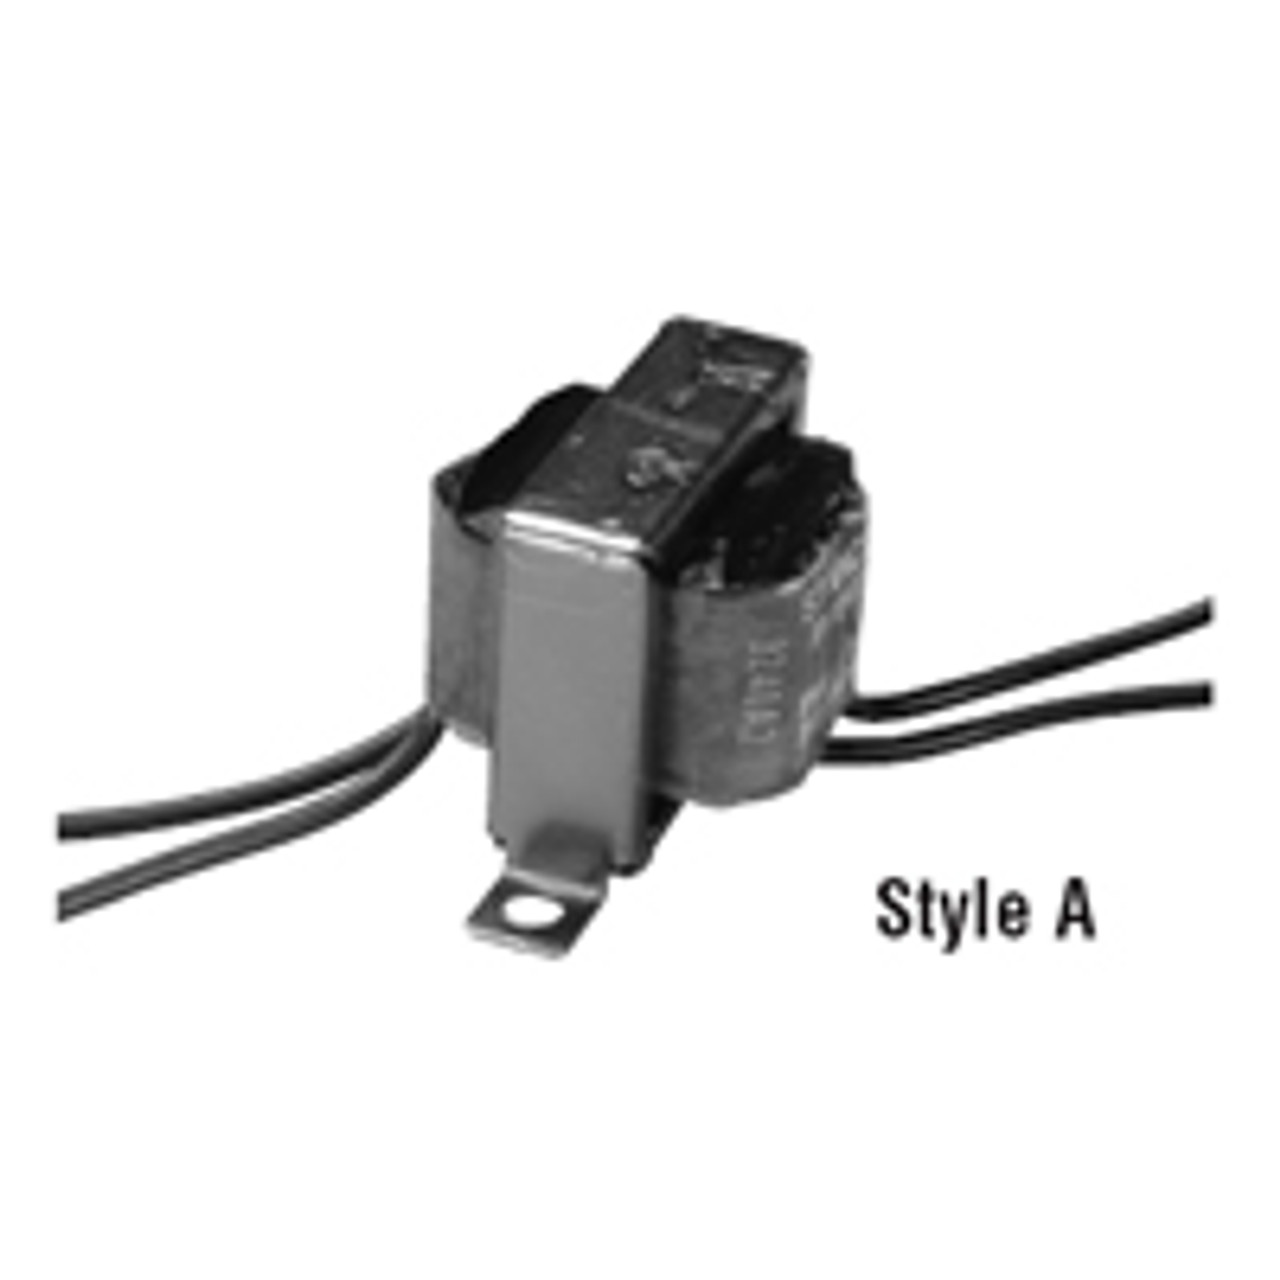 Stancor / White Rodgers P-8620 Step-Down Transformers